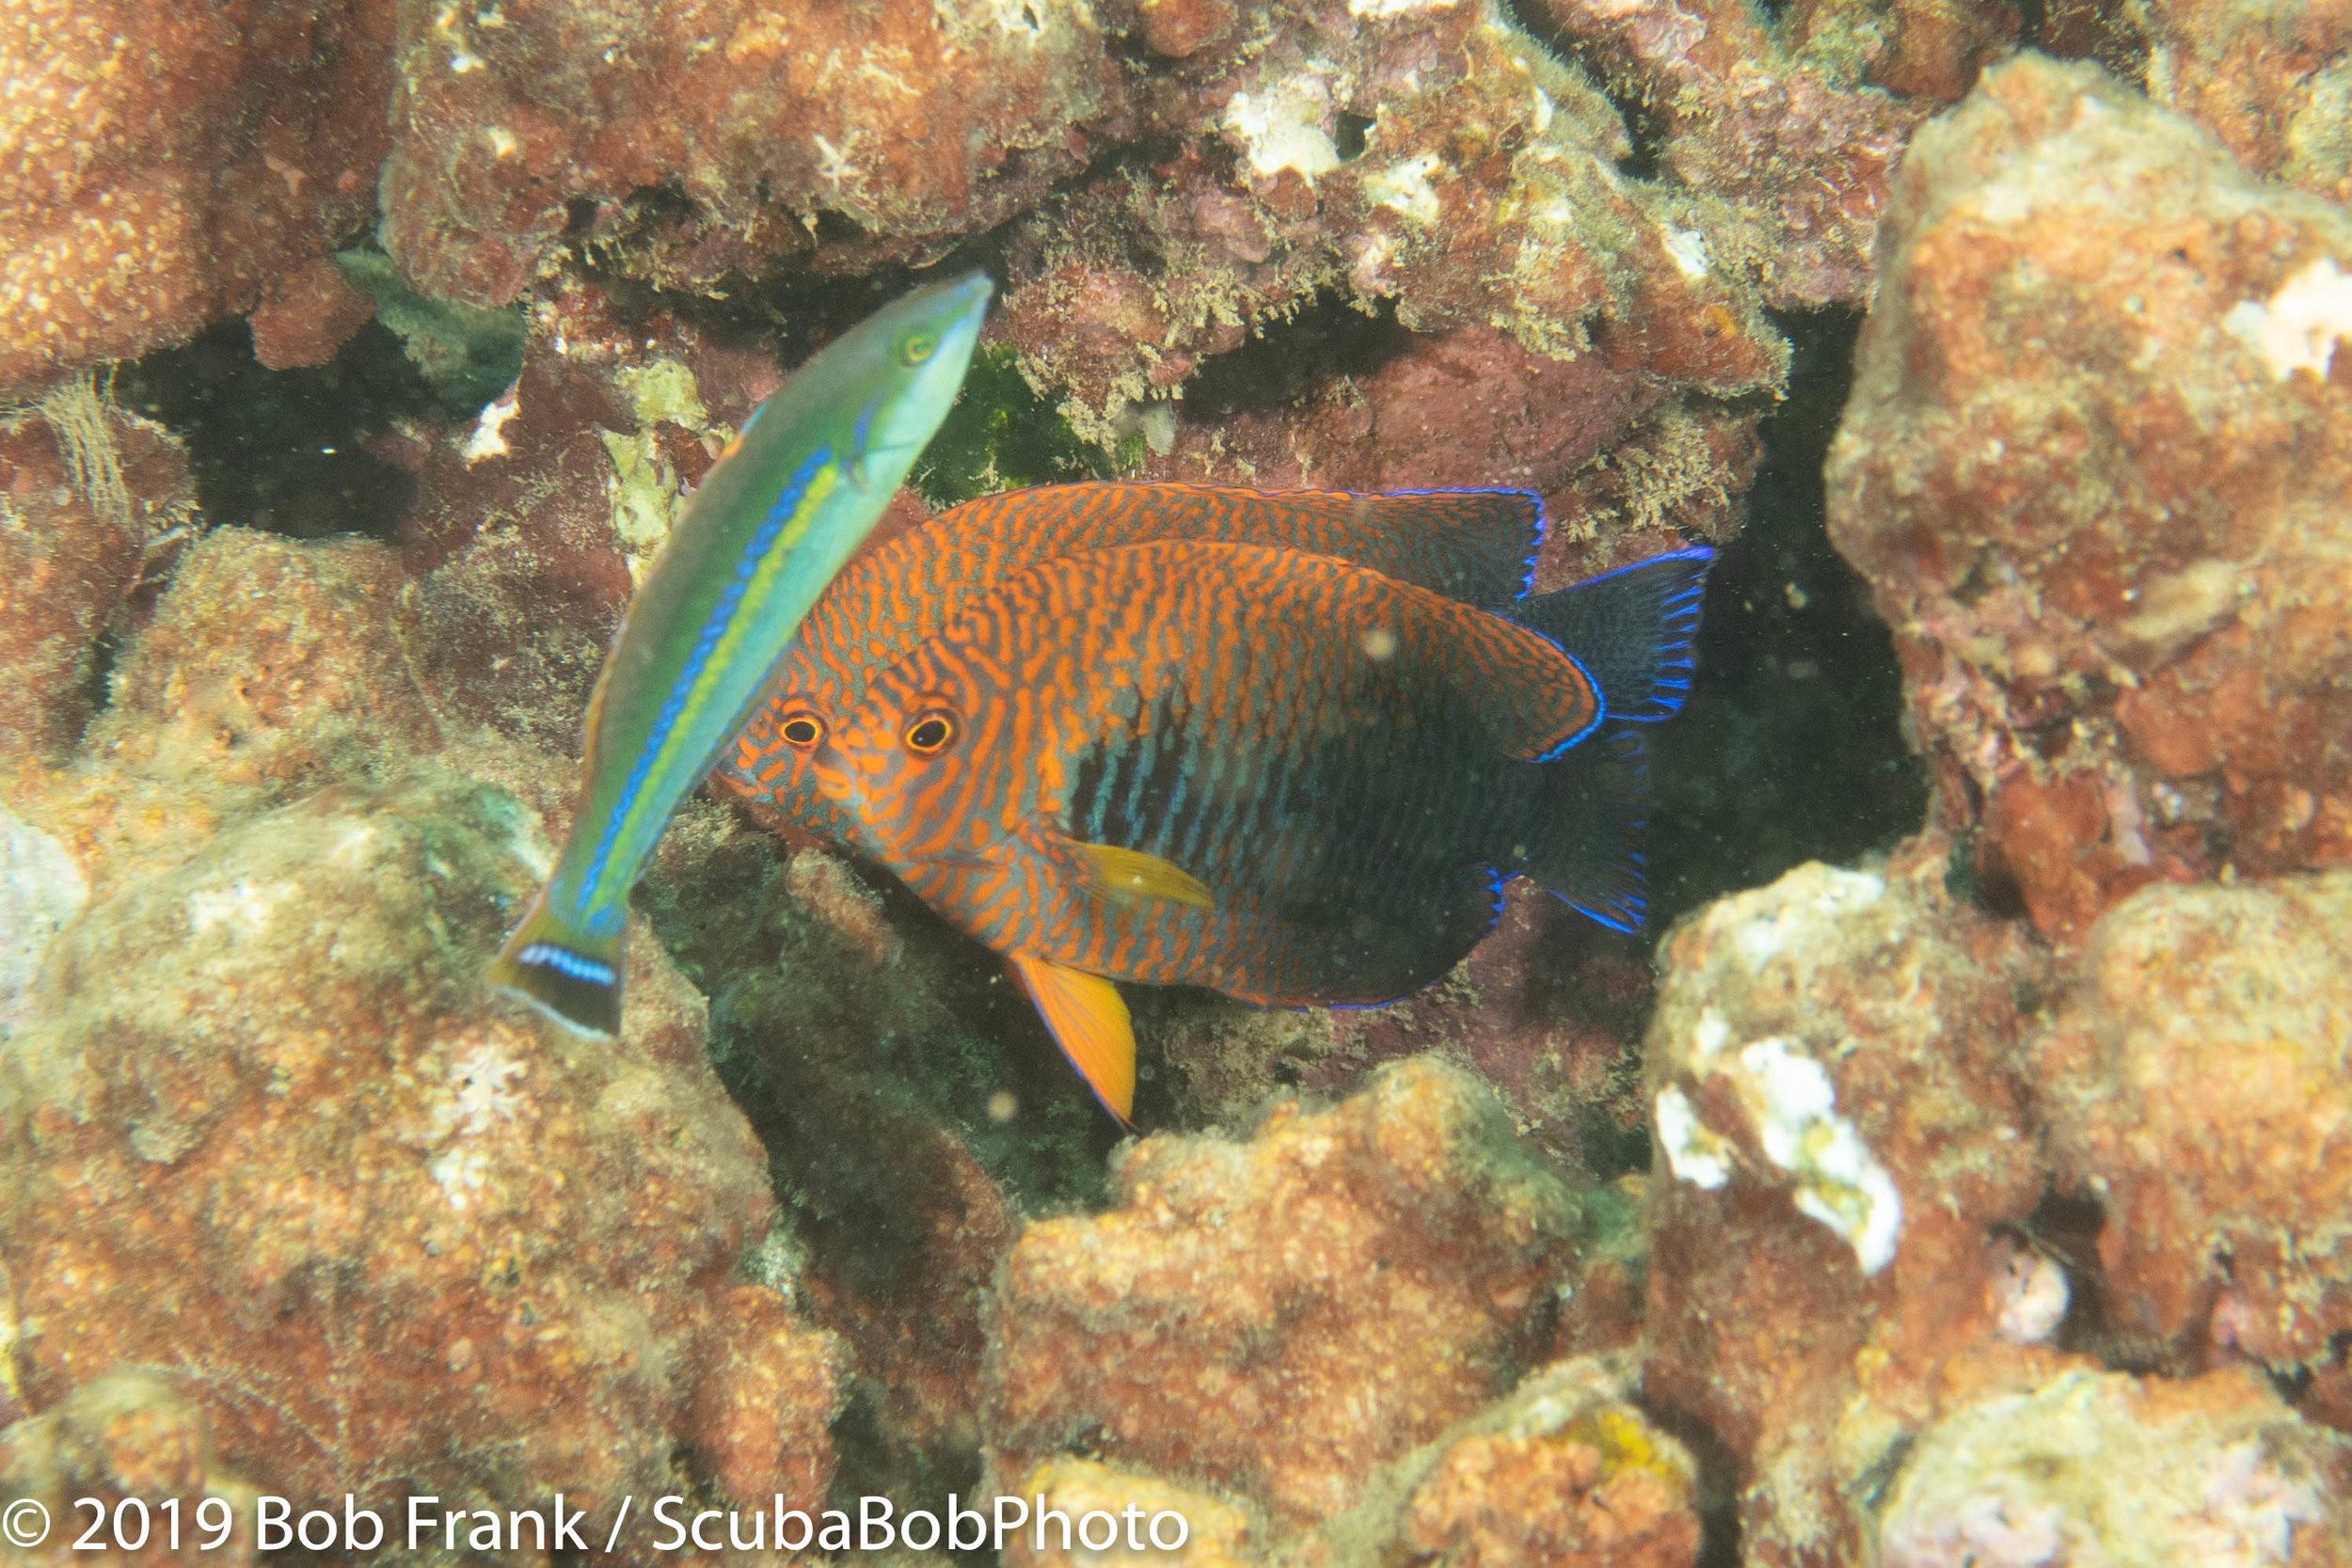 Belted Wrasse (Left) and Potters Angelfish